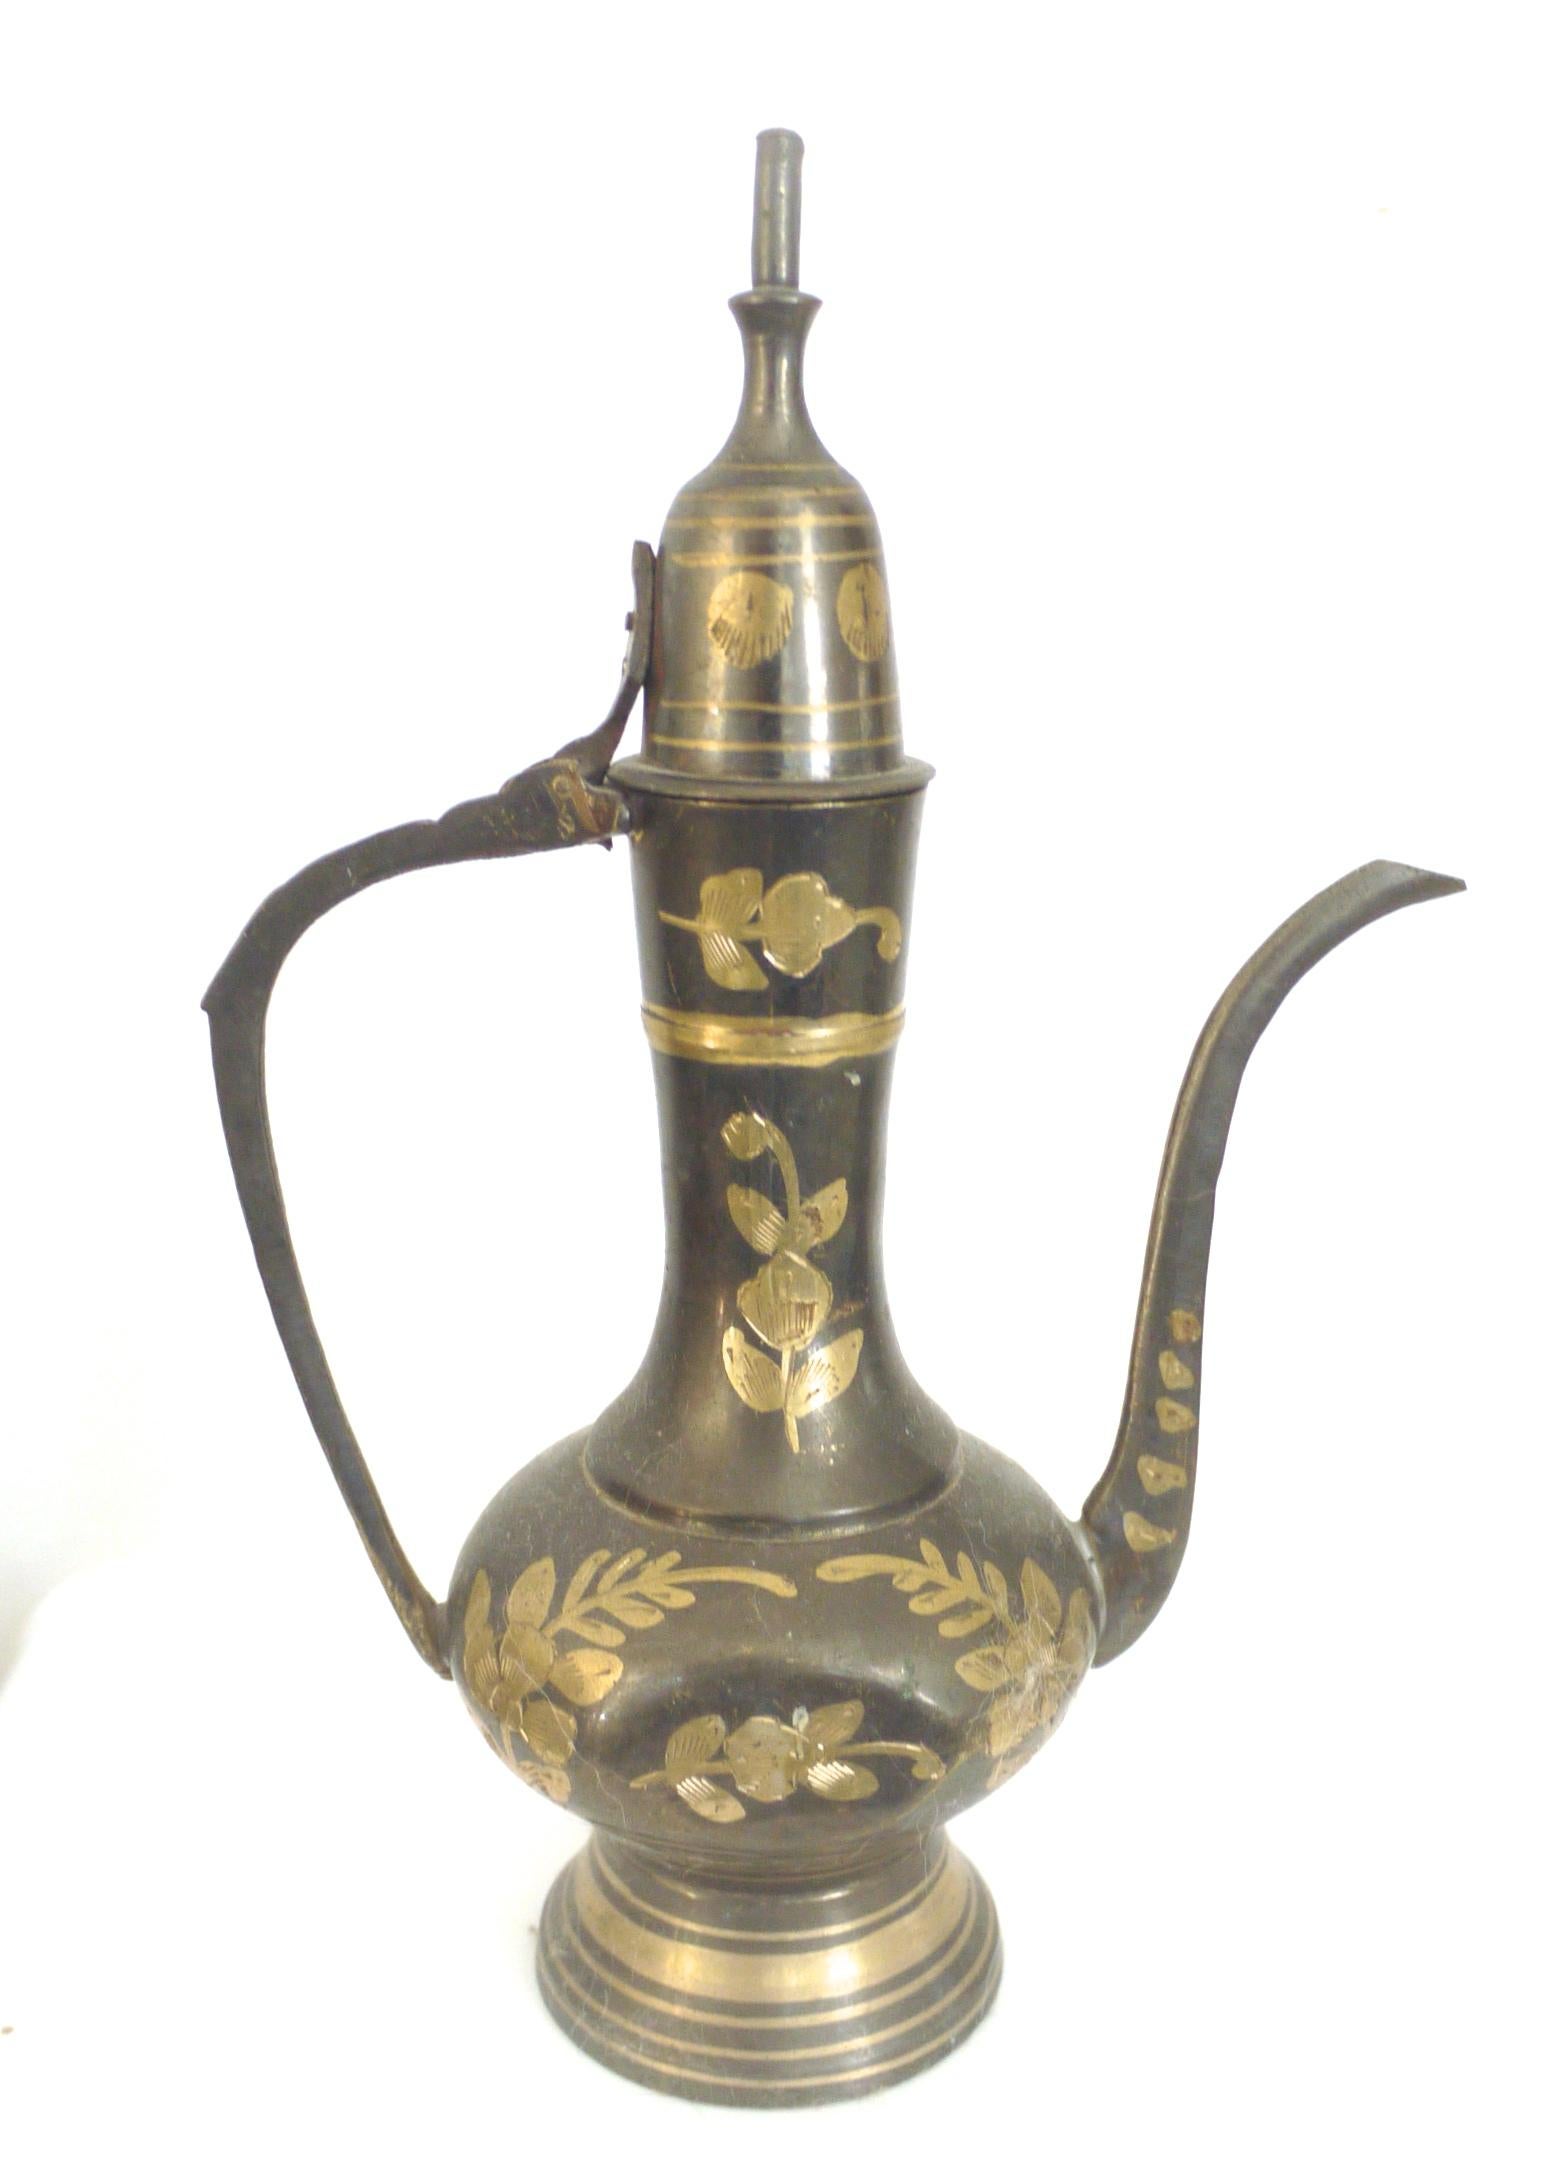 Saudi Arabian Vintage Collection of Decorative from Middle East Dallah Coffee Pots For Sale